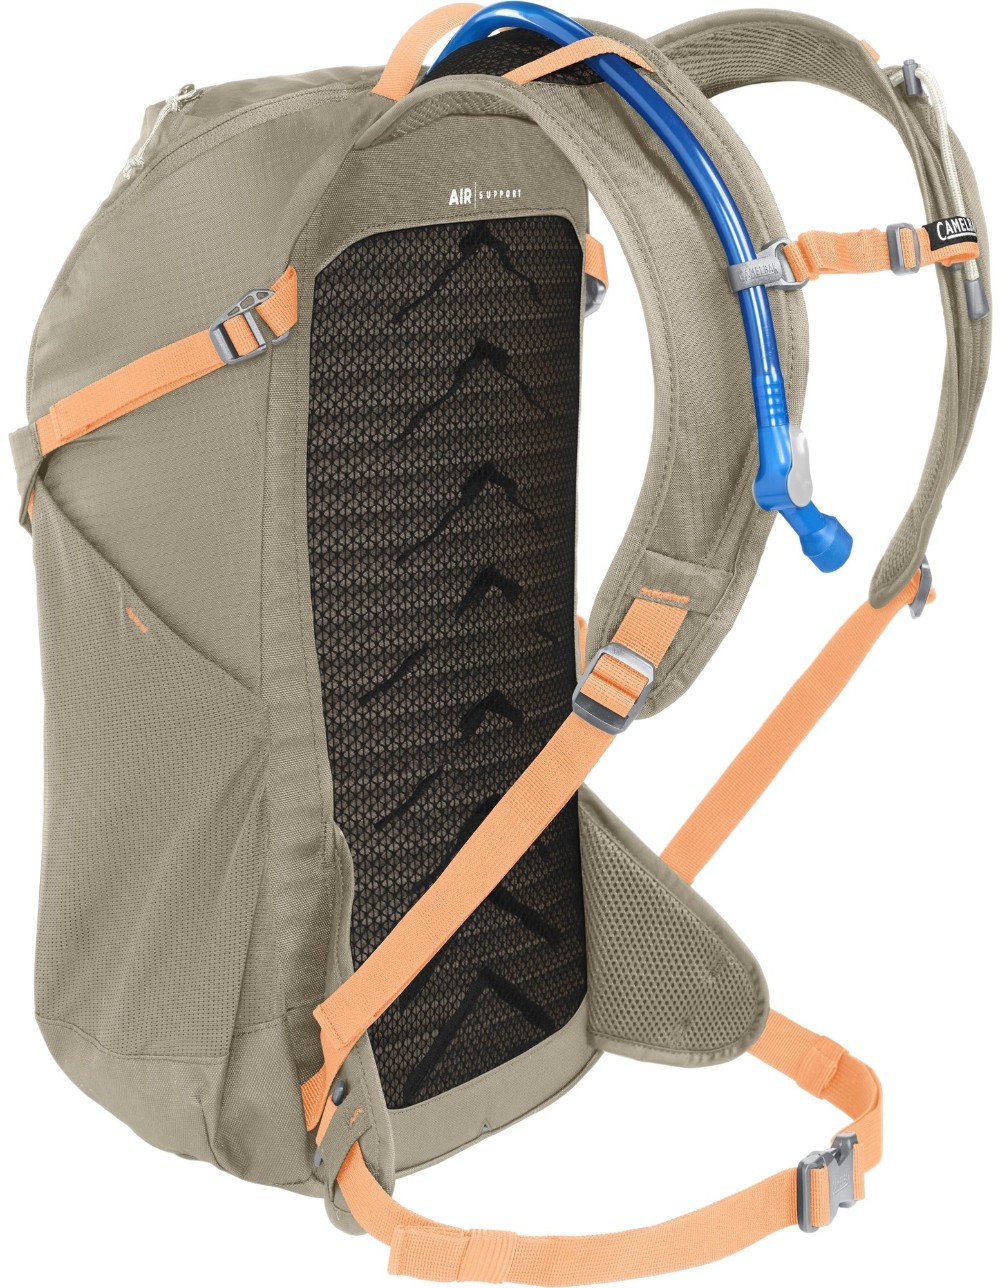 Rim Runner X20 Terra Womens Hydration Pack with 3L image 1